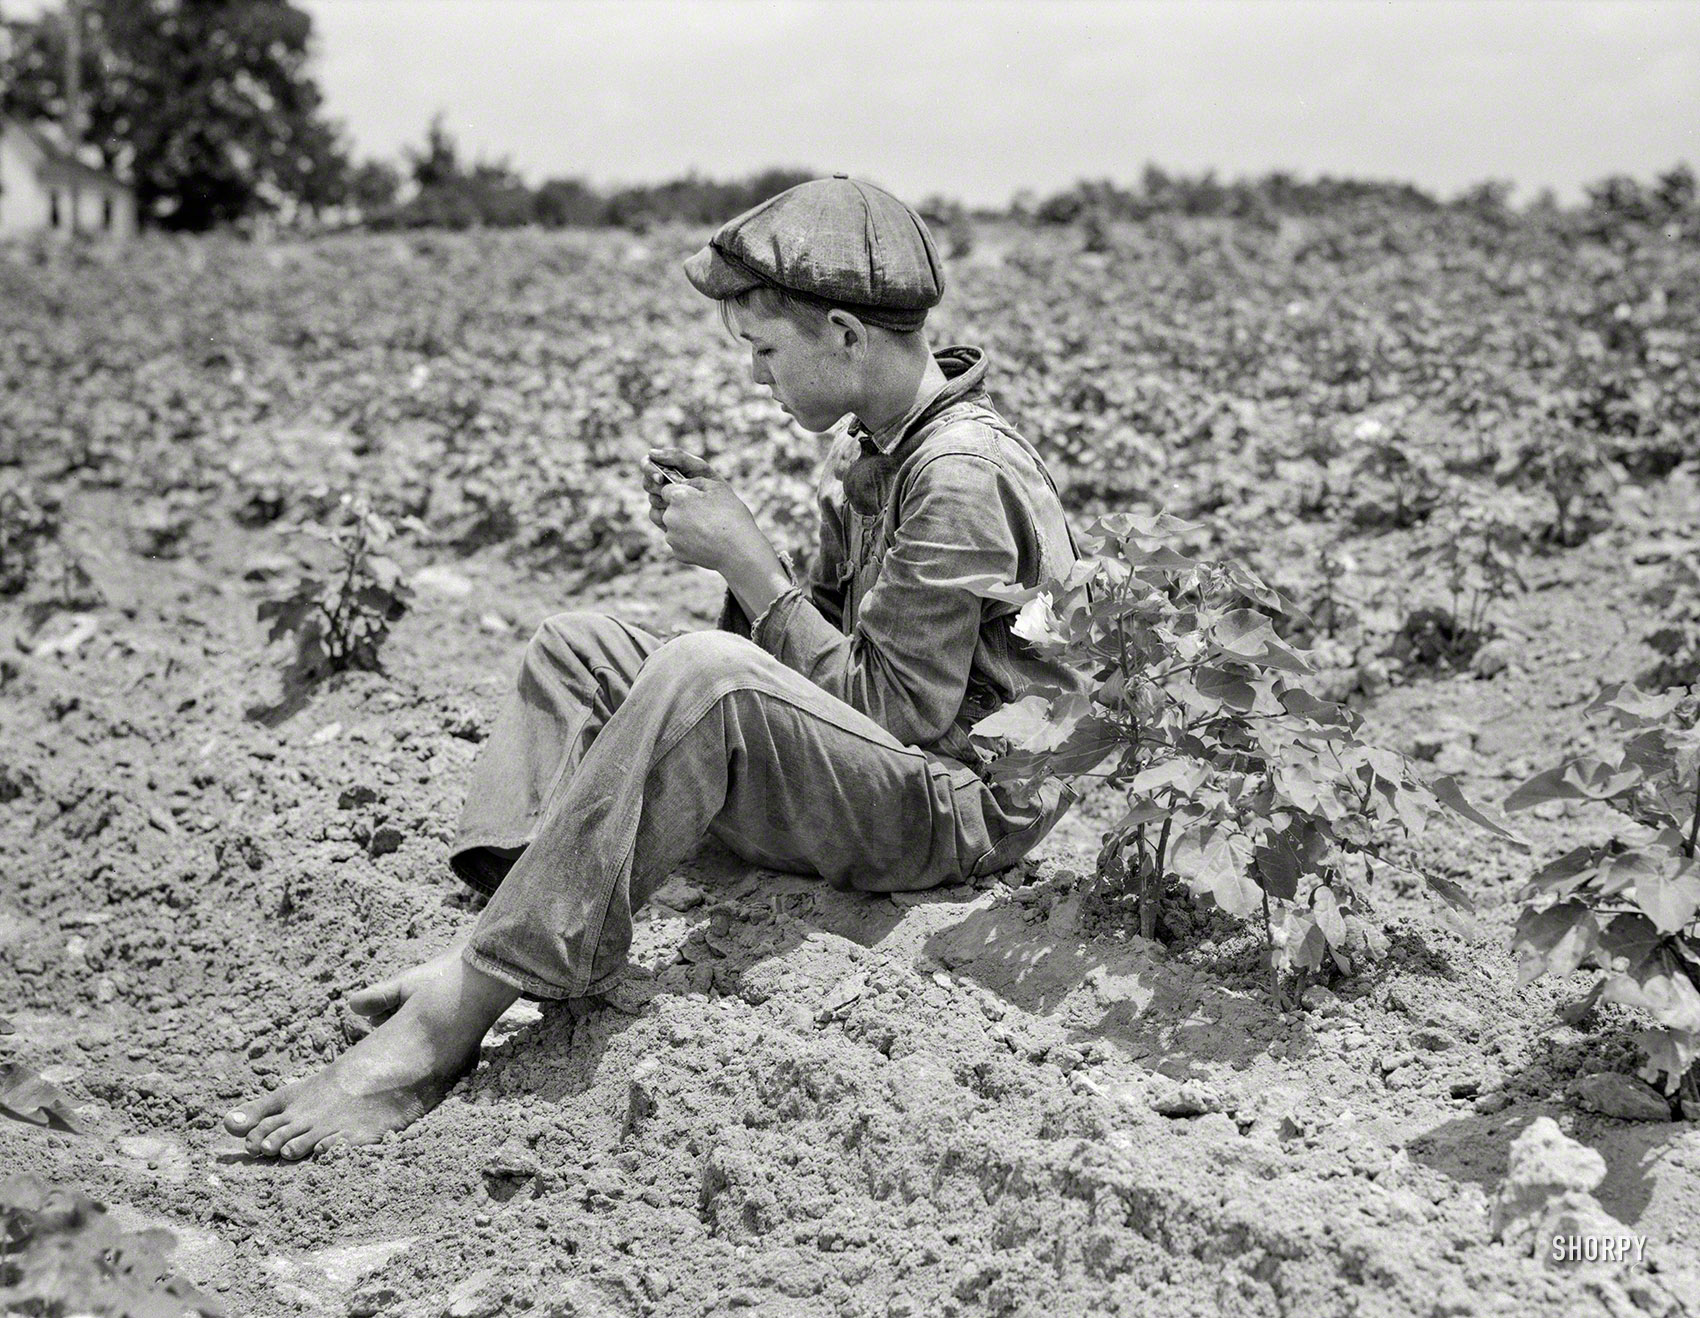 June 1937. "Sharecropper boy near Chesnee, South Carolina." 4x5 nitrate negative by Dorothea Lange for the Farm Security Administration. View full size.